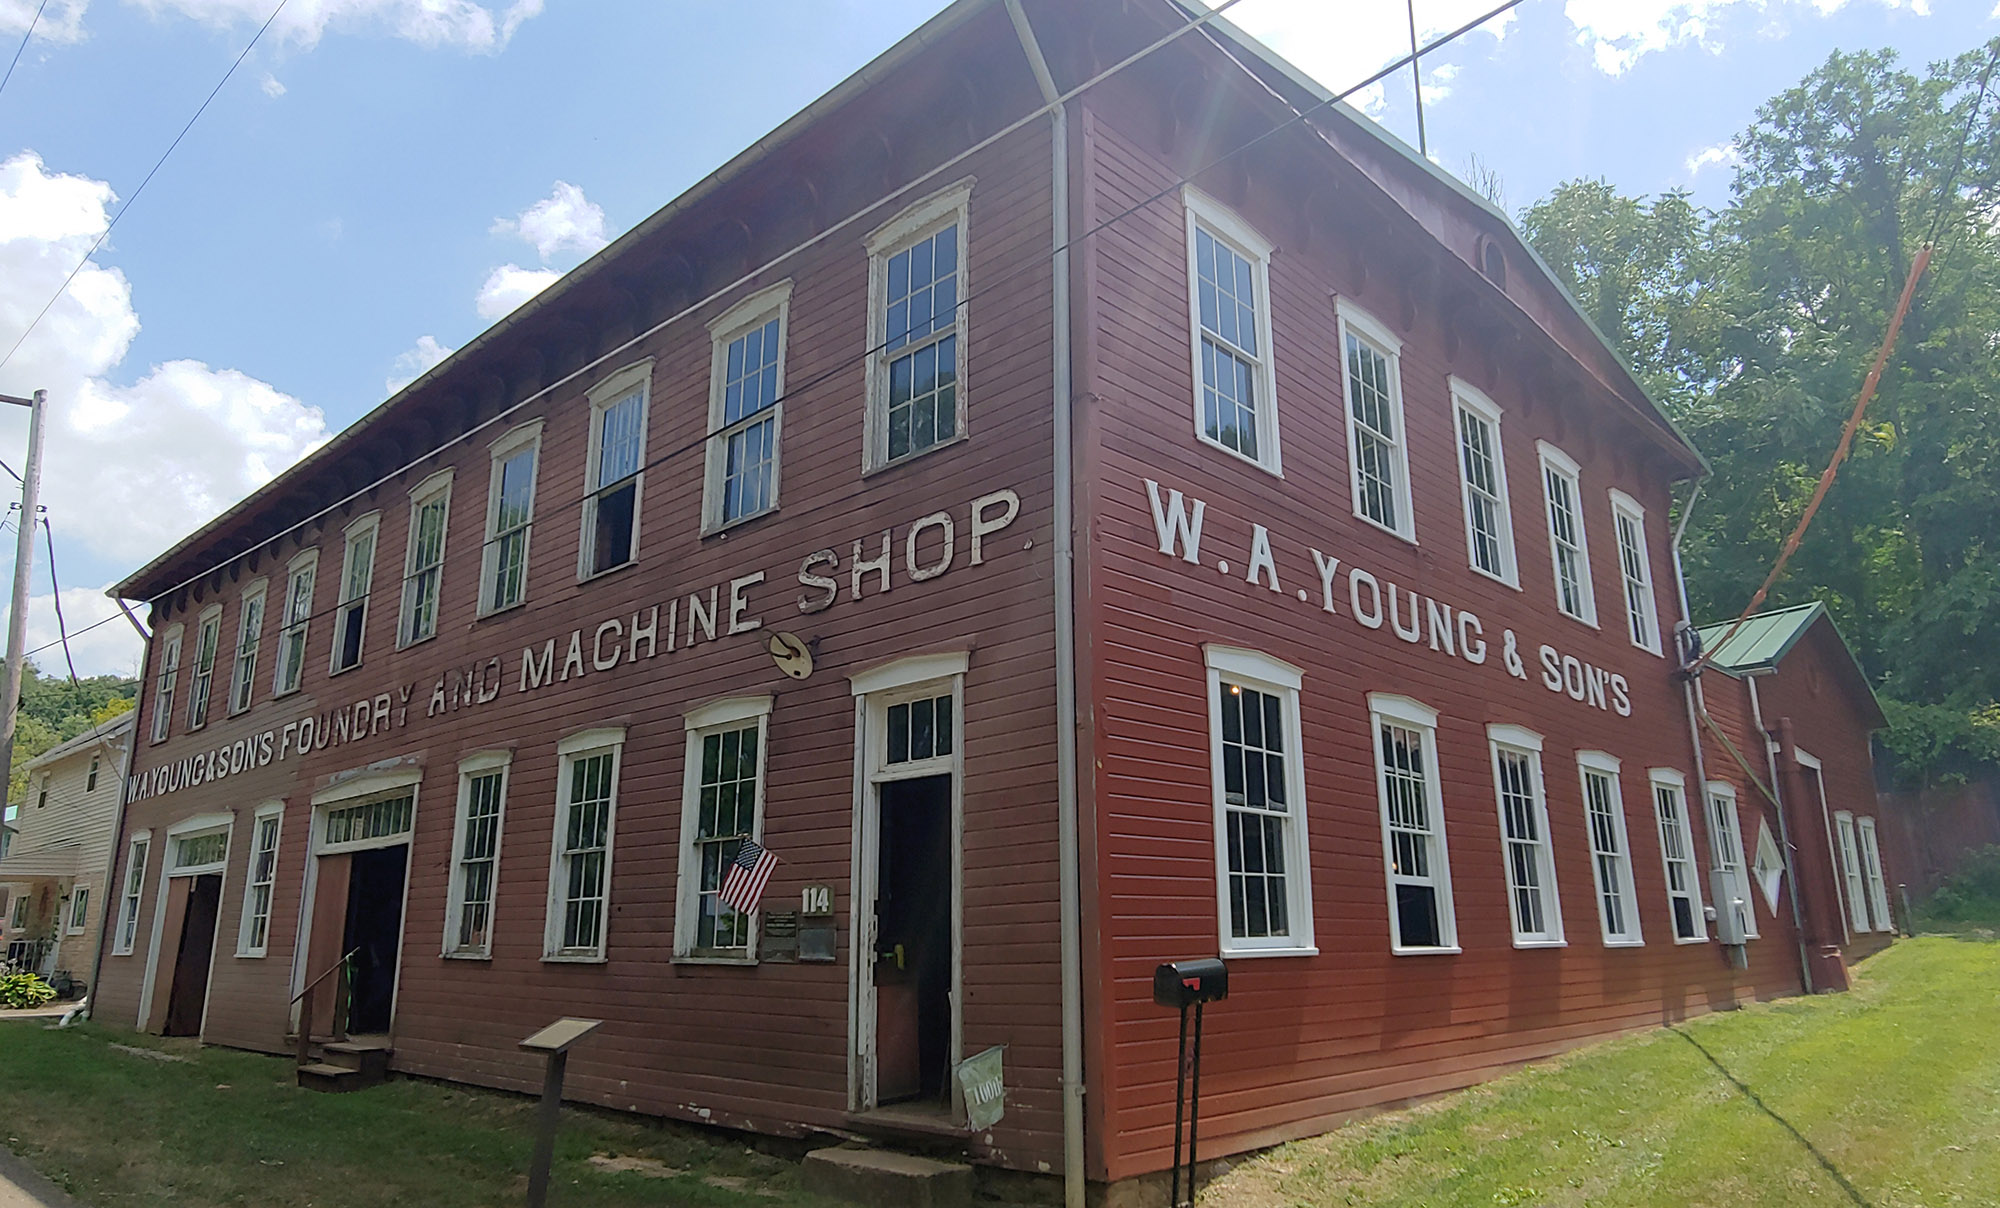 W.A. Young & Sons Foundry and Machine Shop Exterior